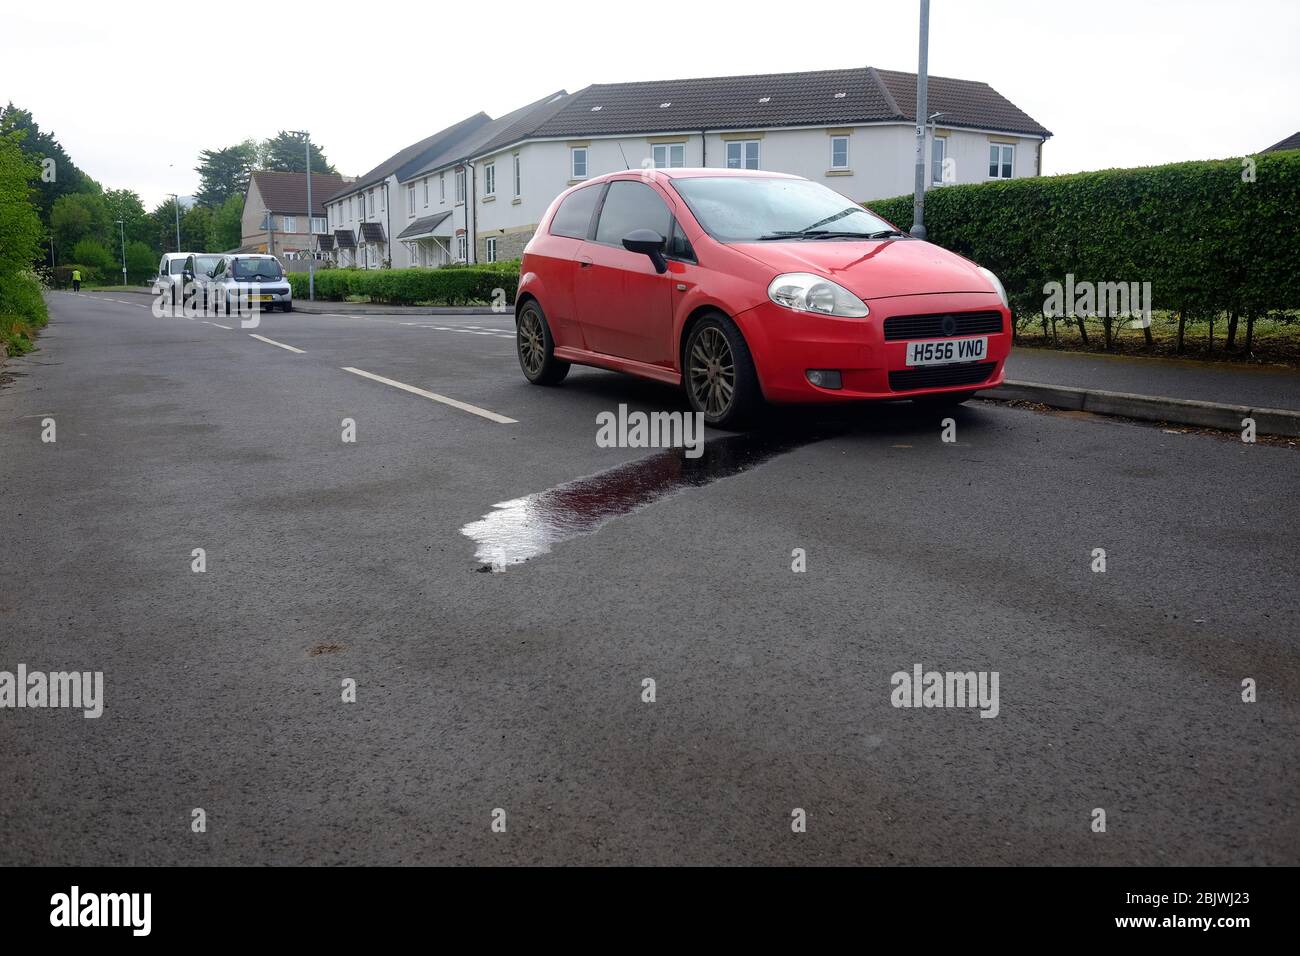 April 2020 - Oil leaking out of an old Fiat Punto. Stock Photo